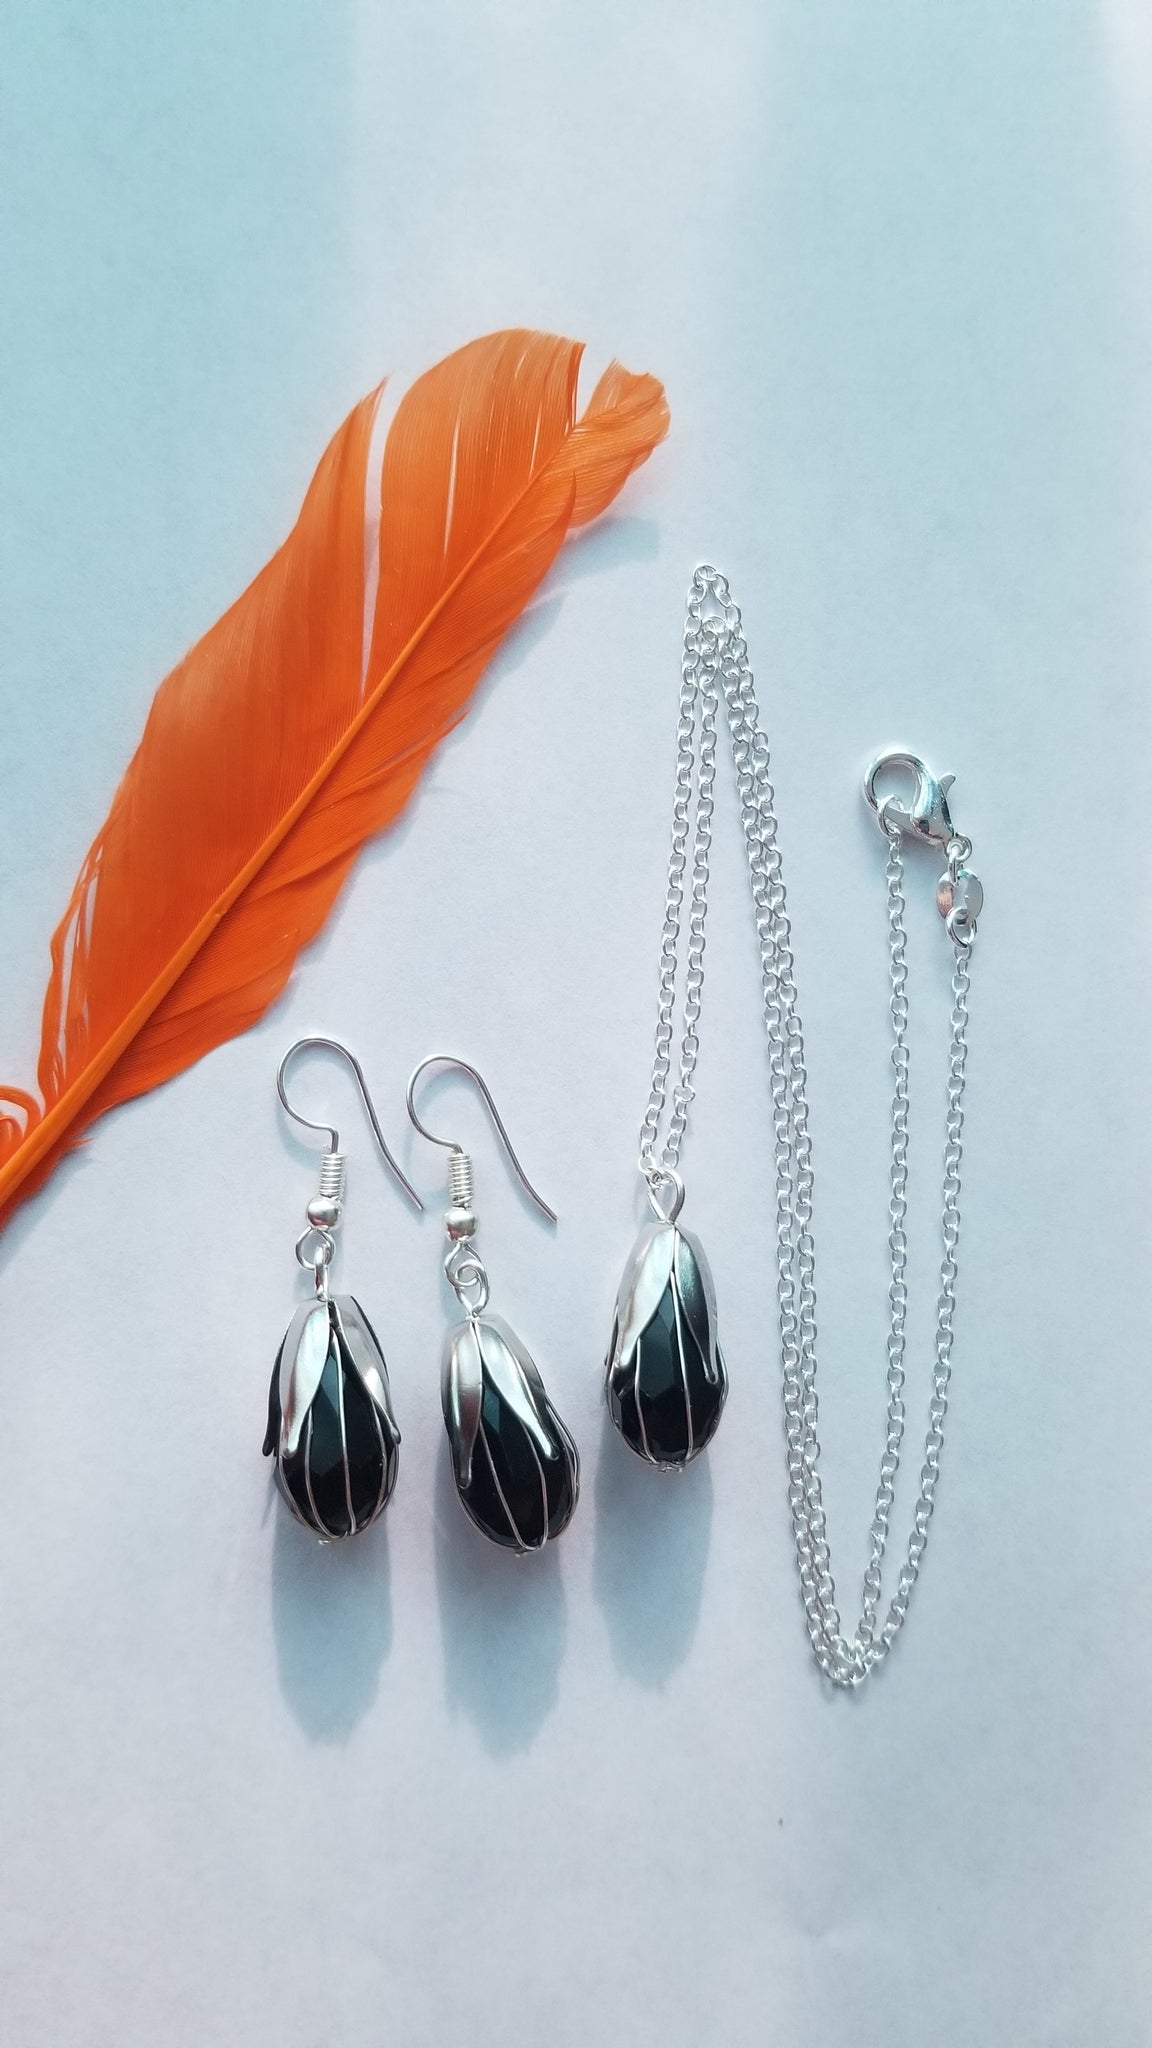 Black Pendant with Chain and Earrings